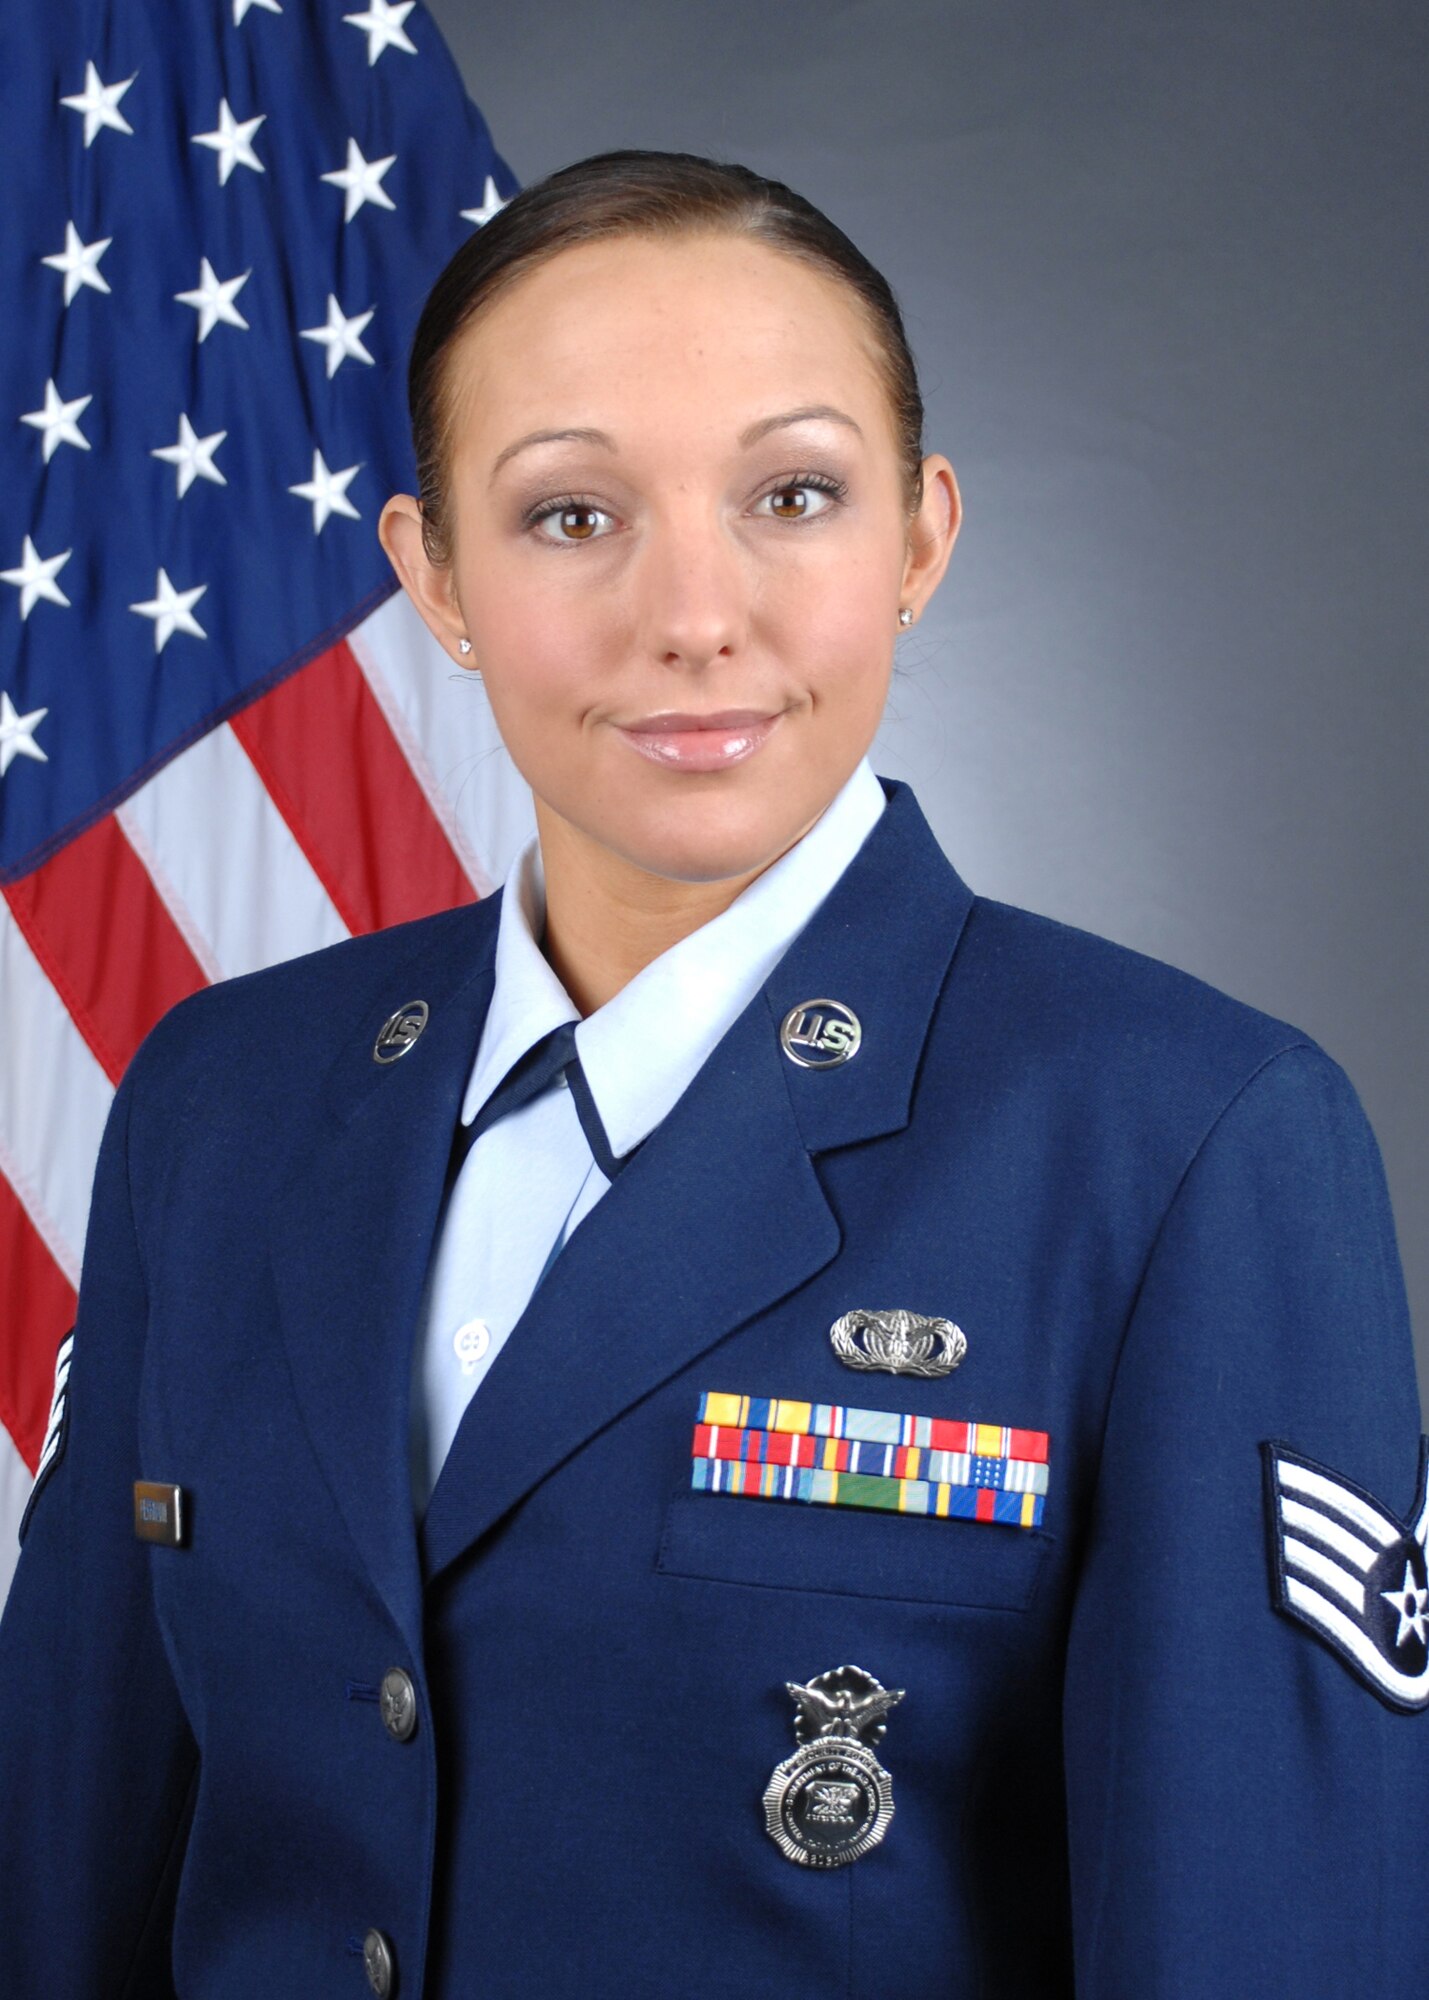 Staff Sgt. Anne Herrmann of Air Force Global Strike Command's 90th Missile Security Forces Squadron was recently selected as an officer cadet and will complete her bachelor's degree in Sociology and Anthropology at Det 172, Valdosta State University in Valdosta, Ga. She was the recipient of a Stripes for Outstanding Airmen to ROTC scholarship type 2. She will receive $18,000 to be used towards tuition and fees and $900 for books per year. Sergeant Herrmann was born and raised in Lebanon, Mo., entered the Air Force on March 6, 2007, and has been a career security forces member. She was promoted below-the-zone to senior airman Jan. 6, 2009, and was selected to staff sergeant on her first time testing. She has been assigned to the 39th Security Forces Squadron at Incirlik Air Base Turkey, 65th Security Forces Squadron at Lajes Field Azores, Portugal, and is currently assigned to the 90th Missile Security Forces Squadron, F. E. Warren Air Force Base, Wyo. (U.S. Air Force photo by Blaze Lipowski)